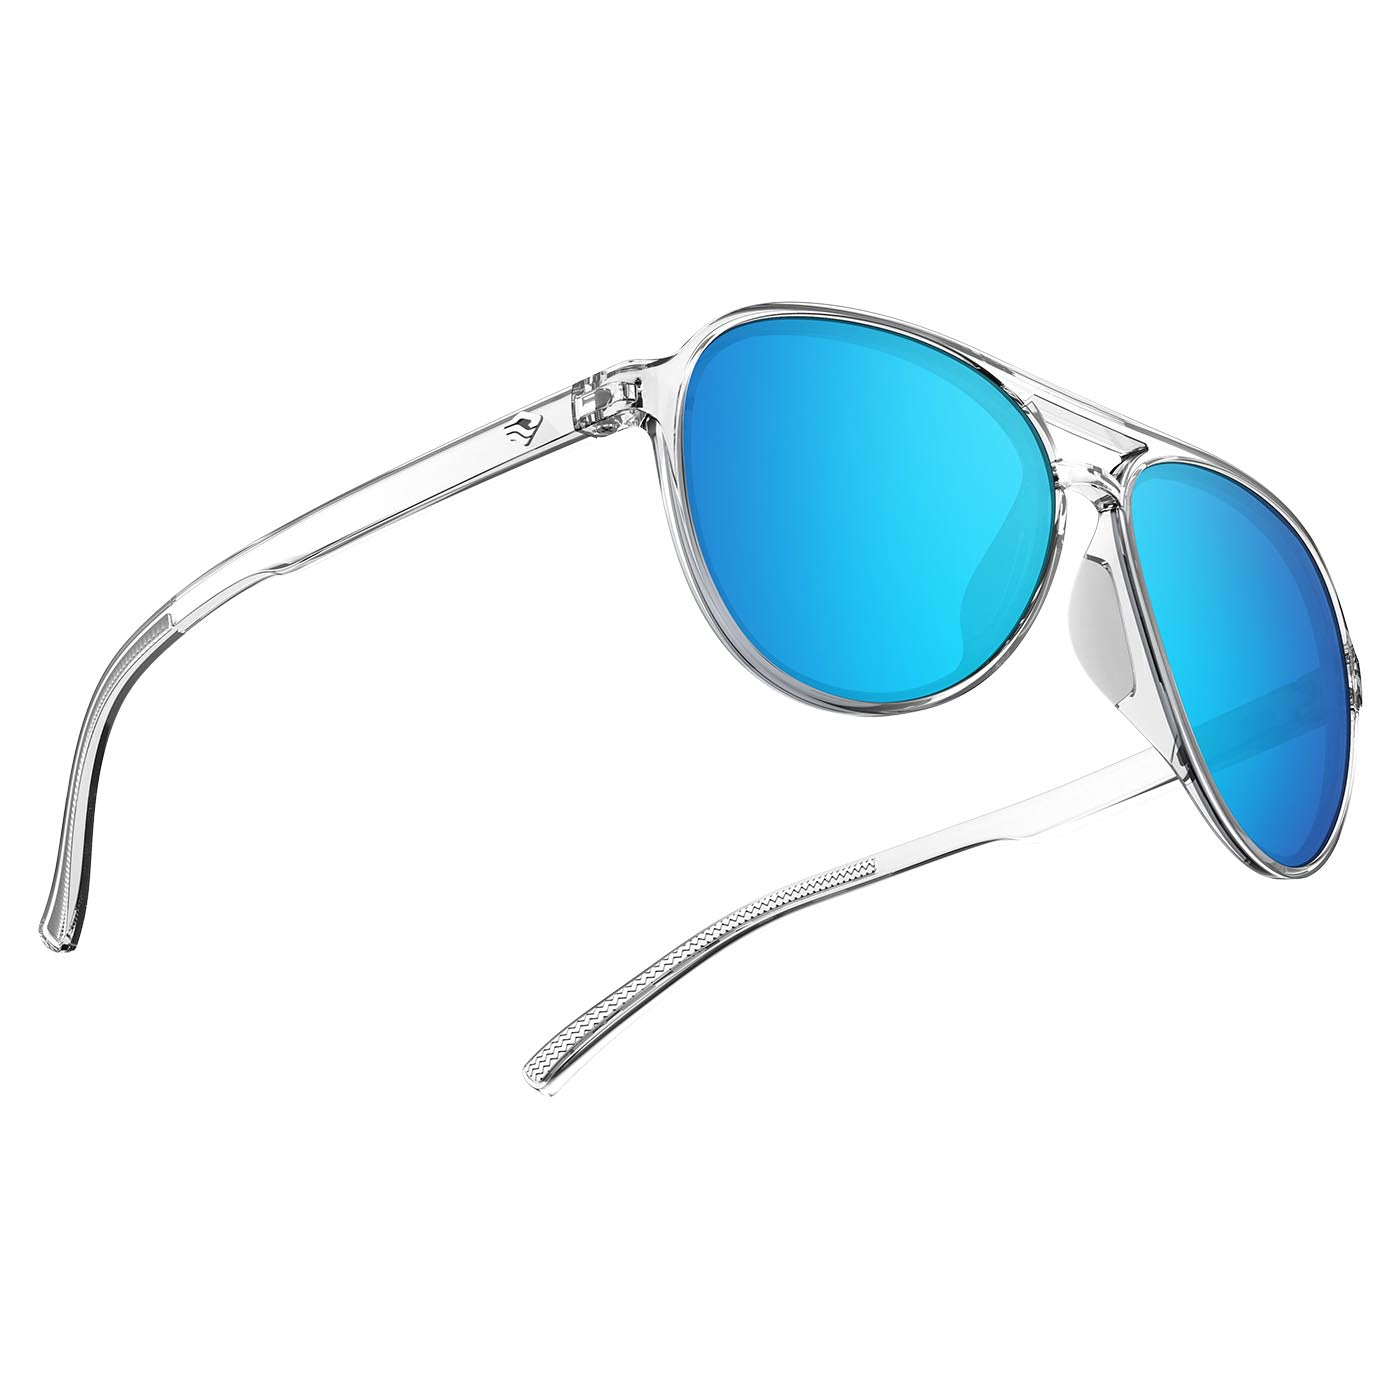 Crystal Sky Polarized Aviator Sunglasses for Men and Women - Lifetime Warranty - Perfect for Sports, Fishing, Boating, Beach, Golf & Driving 